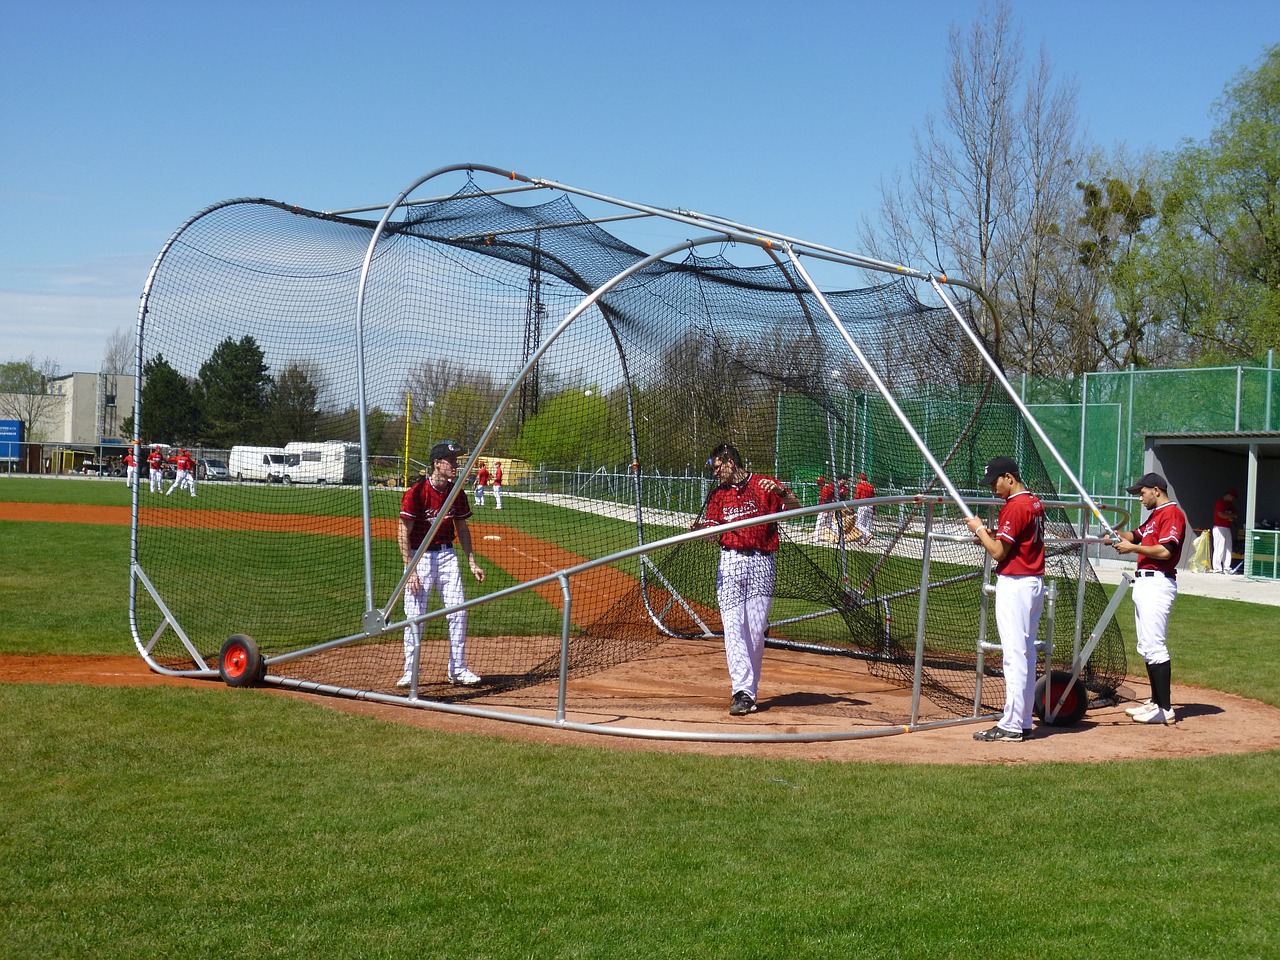 The Ultimate Guide to the Best Batting Cages for Home Use in 2023